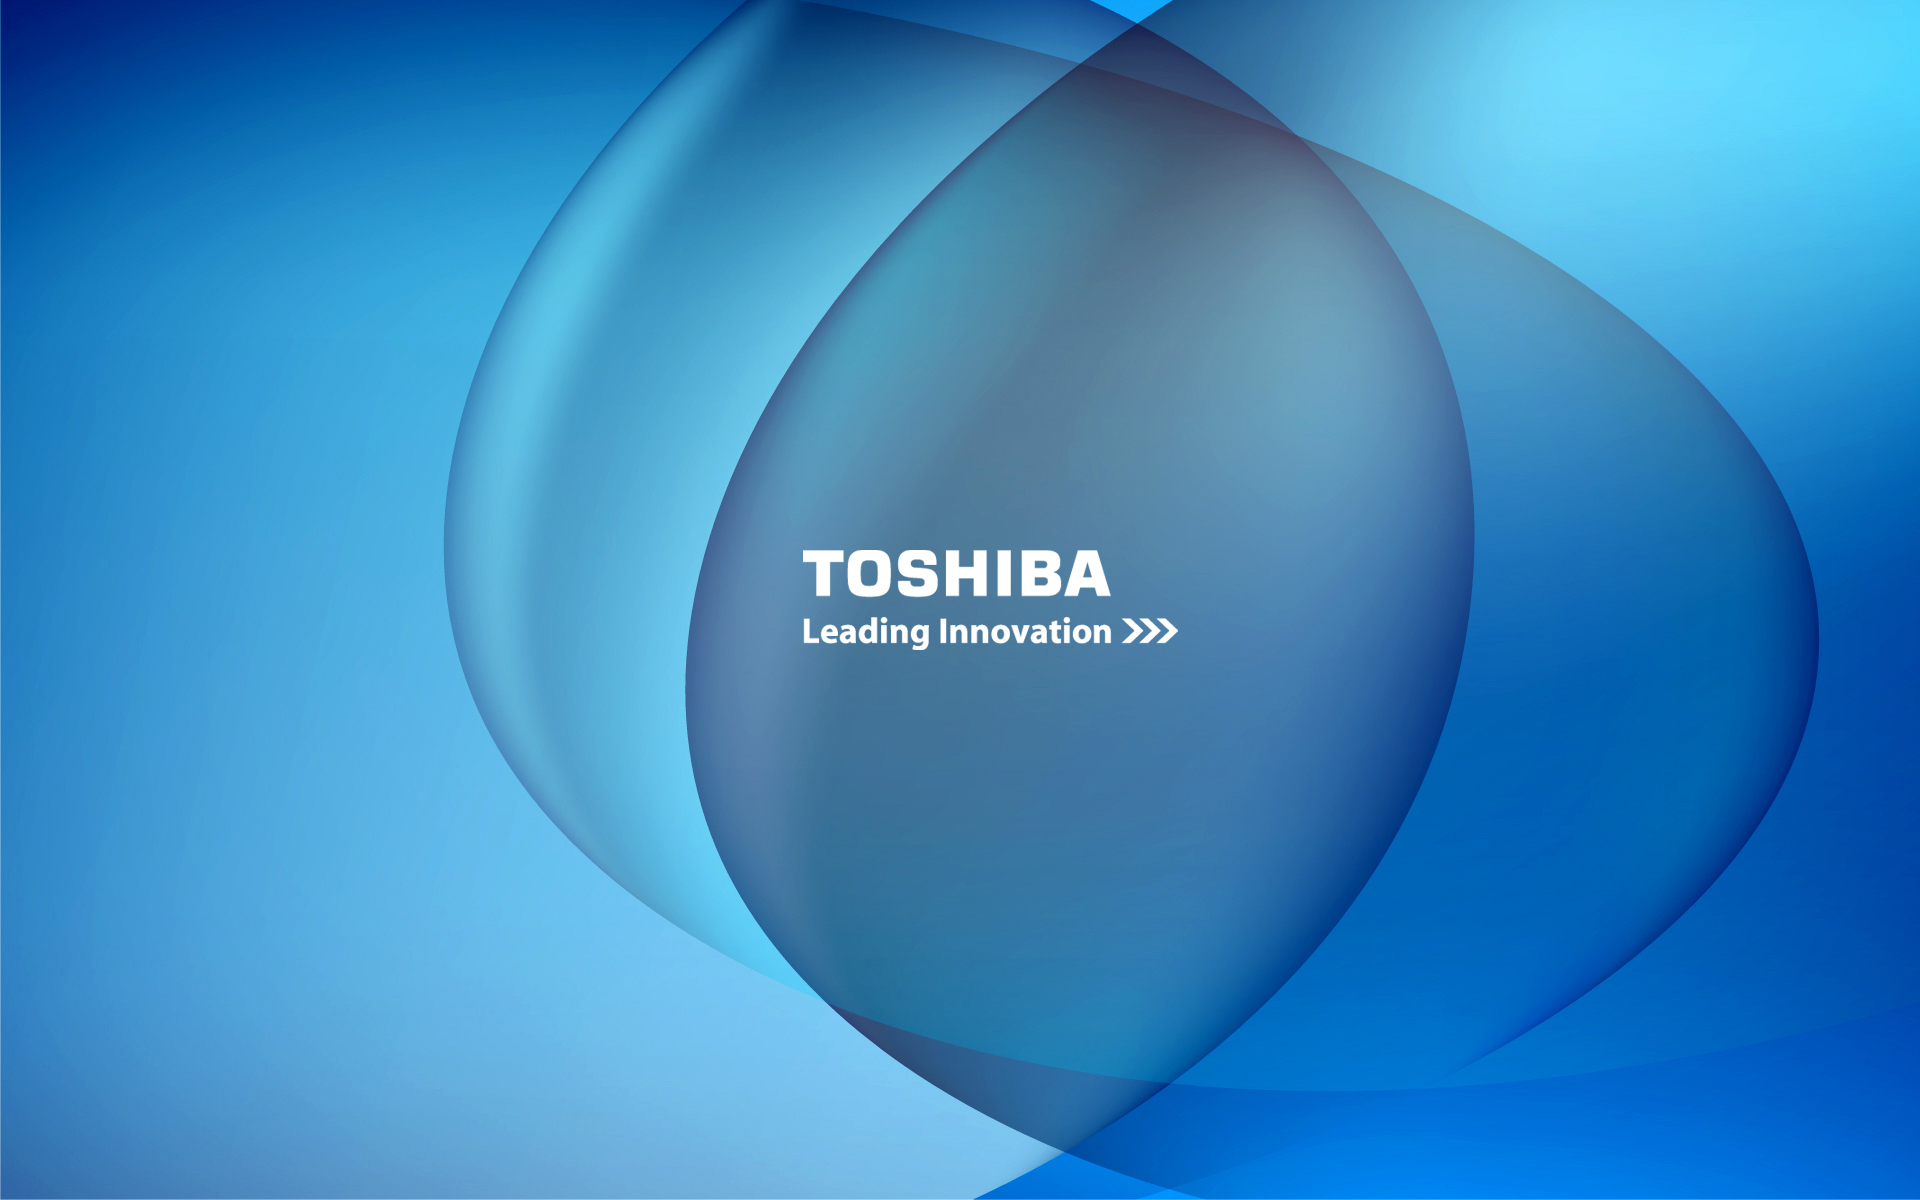 Image Toshiba Laptop Windows Wallpaper Pc Android iPhone